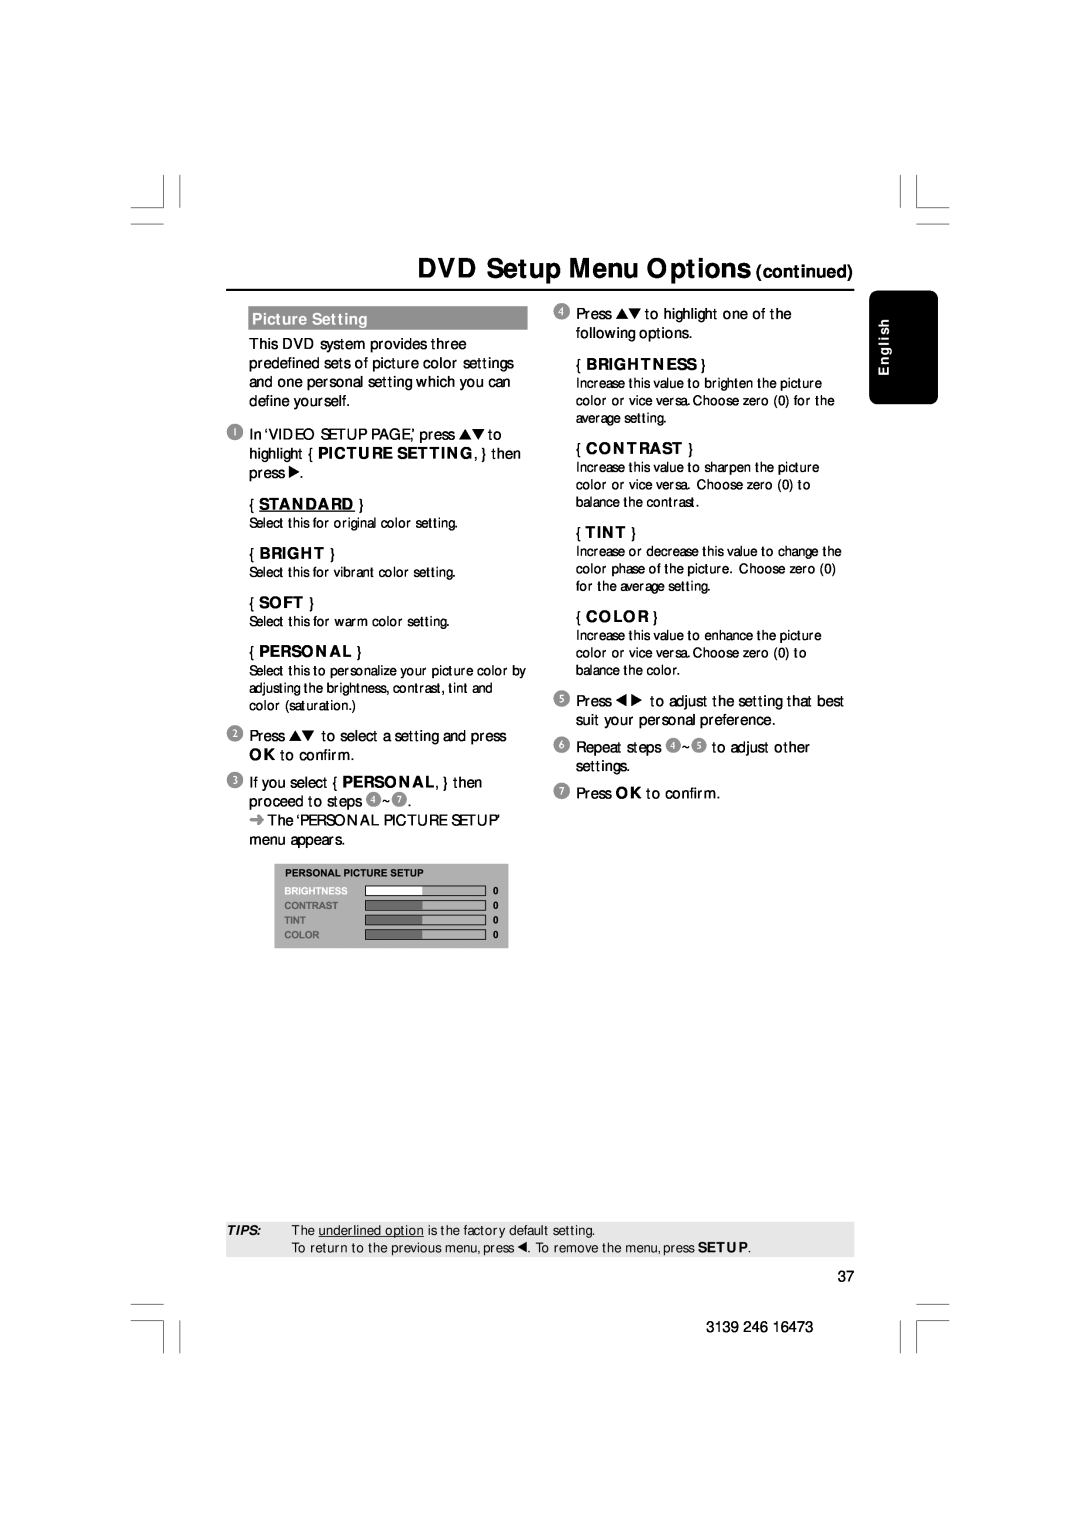 Philips HTS5510C DVD Setup Menu Options continued, Picture Setting, Standard, Brightness, Contrast, Tint, Soft, Personal 